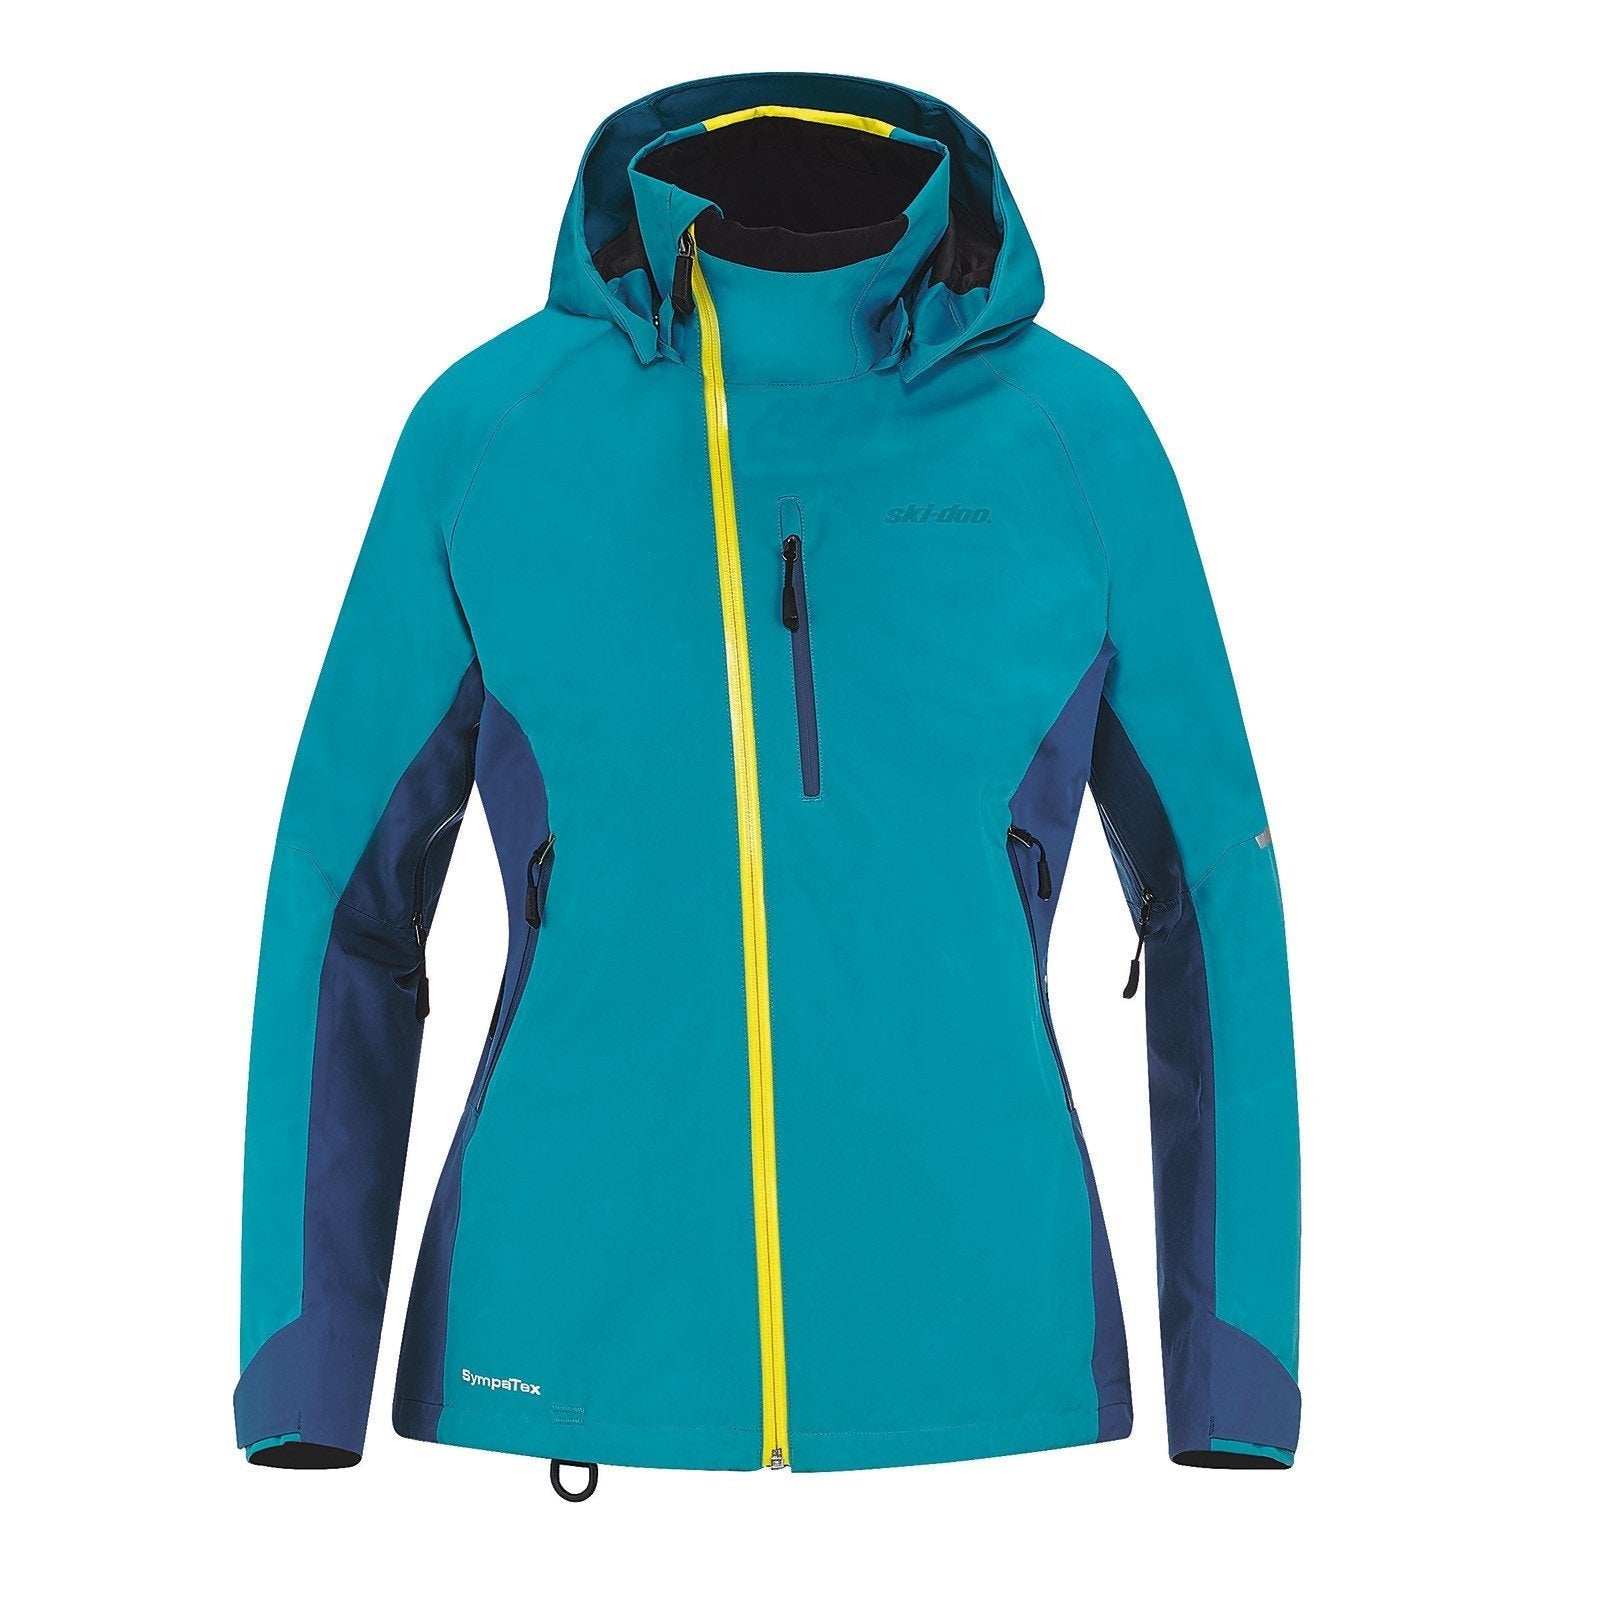 Women Clothing Xs Xl 50€ - 100€, Mikellides Sports